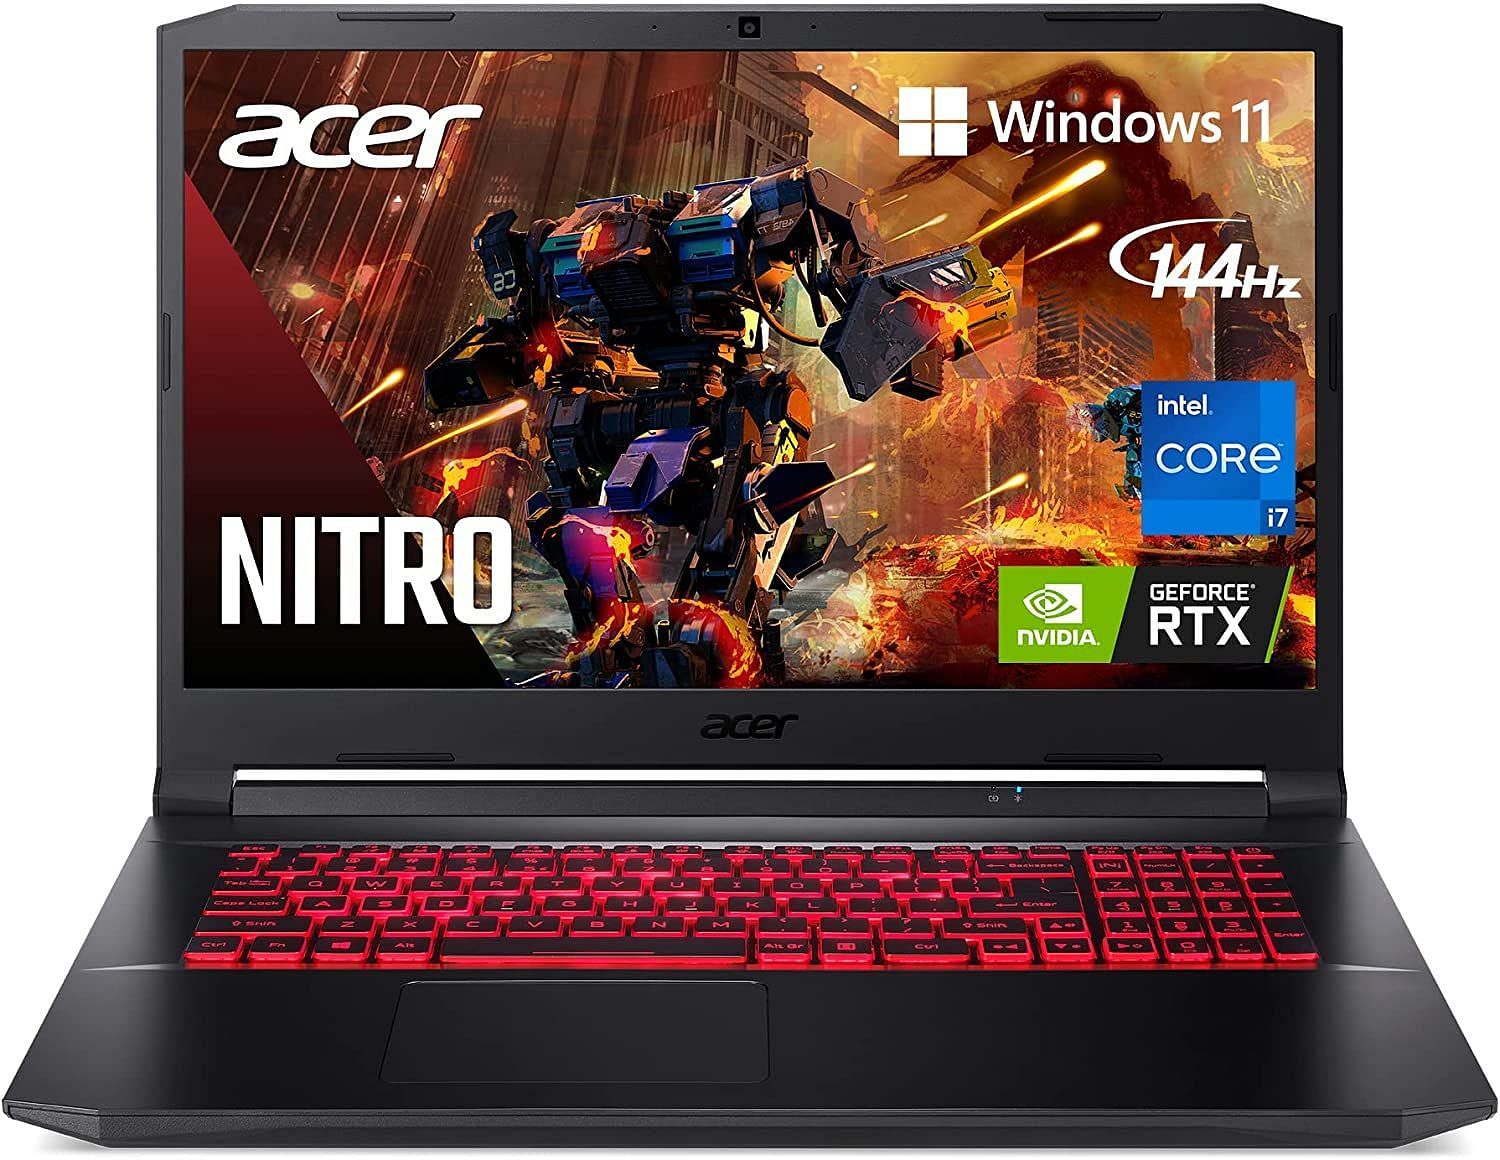 The Acer Nitro 5 AN5-17&#039;s large screen makes spotting loot and enemies easier in the game (Image via Amazon)